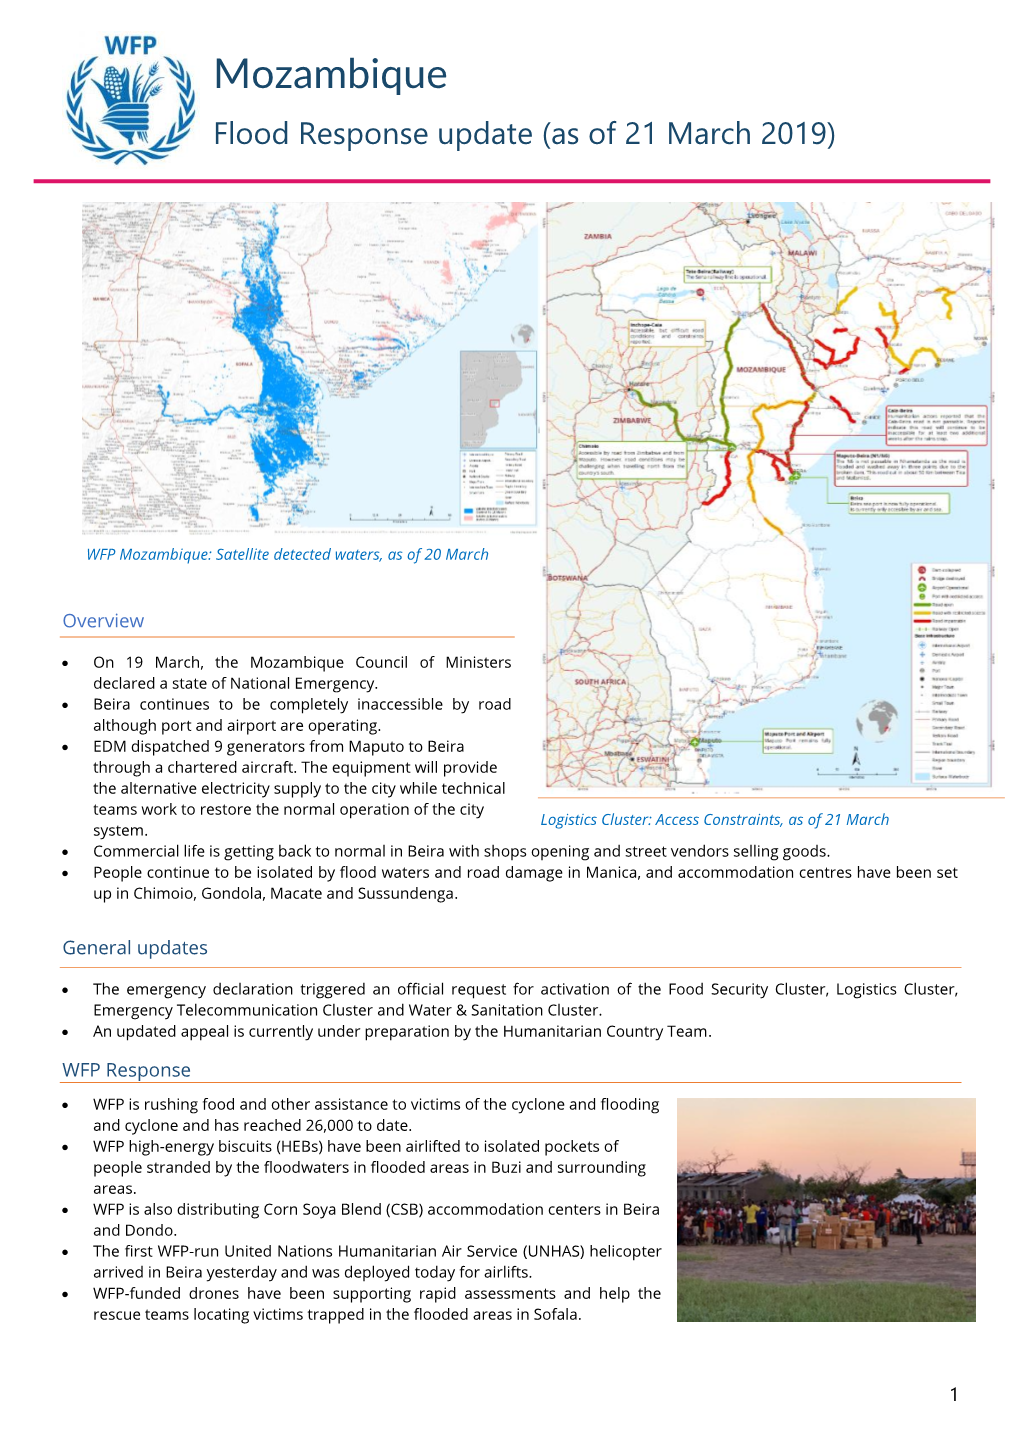 Mozambique Flood Response Update (As of 21 March 2019)